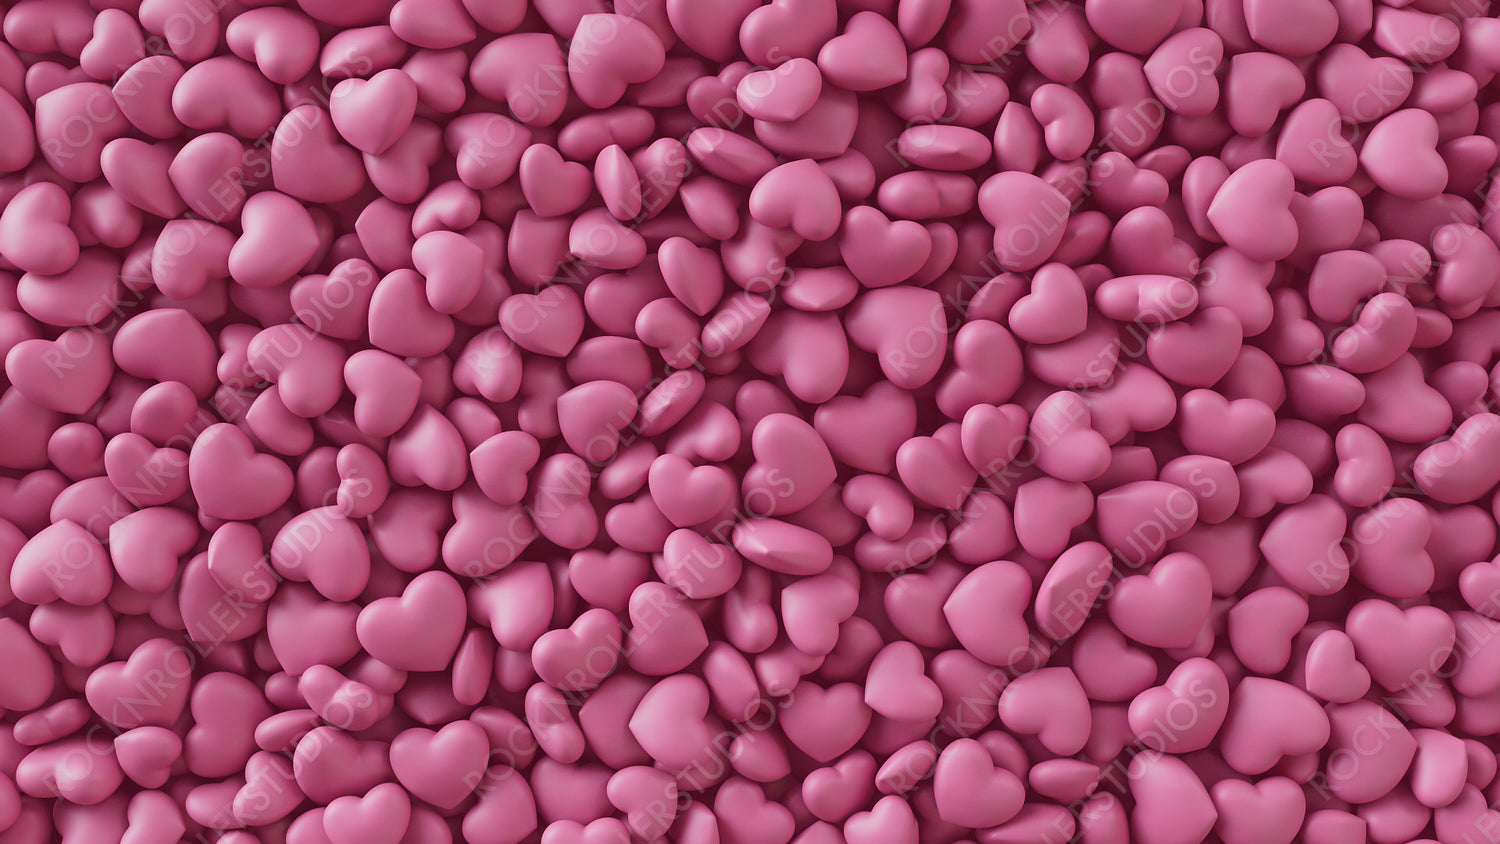 Multicolored Heart background. Valentine Wallpaper with Pink, White and Black love hearts. 3D Render 